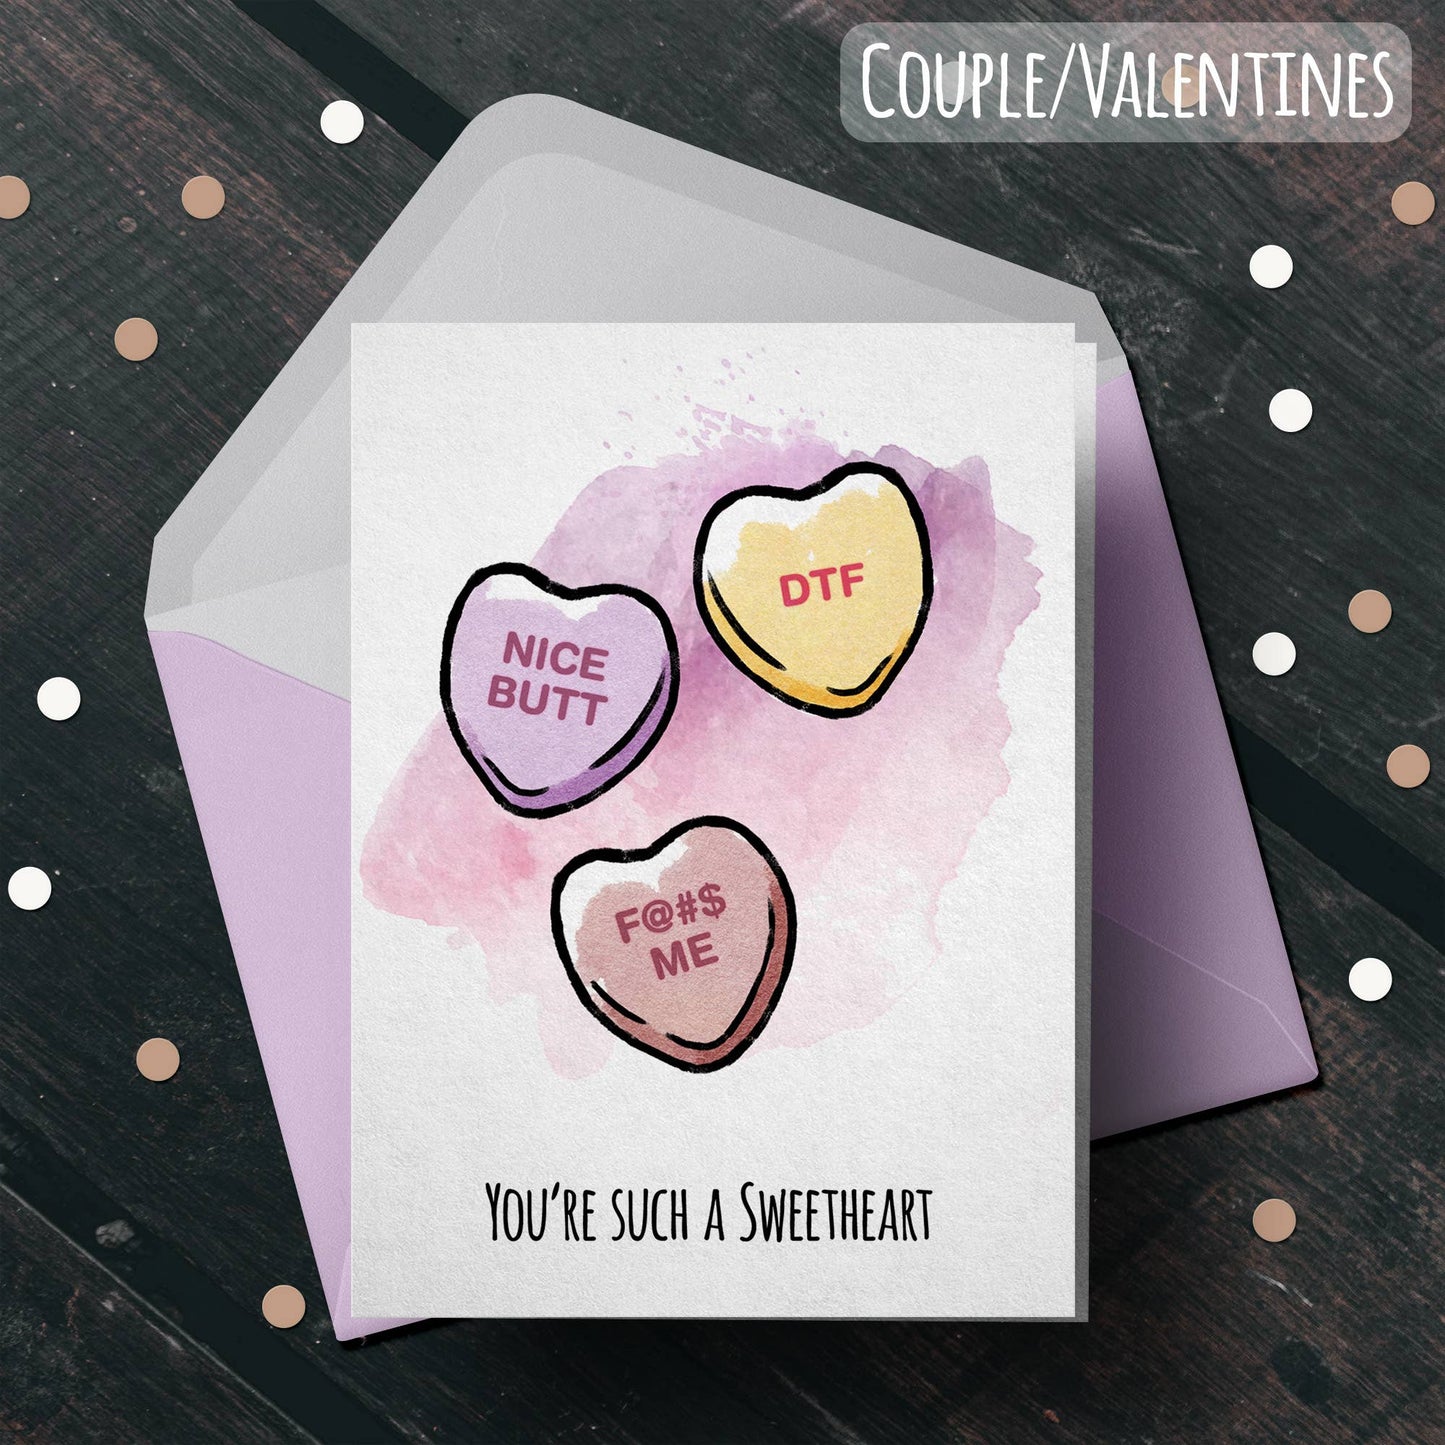 Plant Goals Plant Shop "Sweet Heart" - Funny Candy Heart Valentine's Day Card